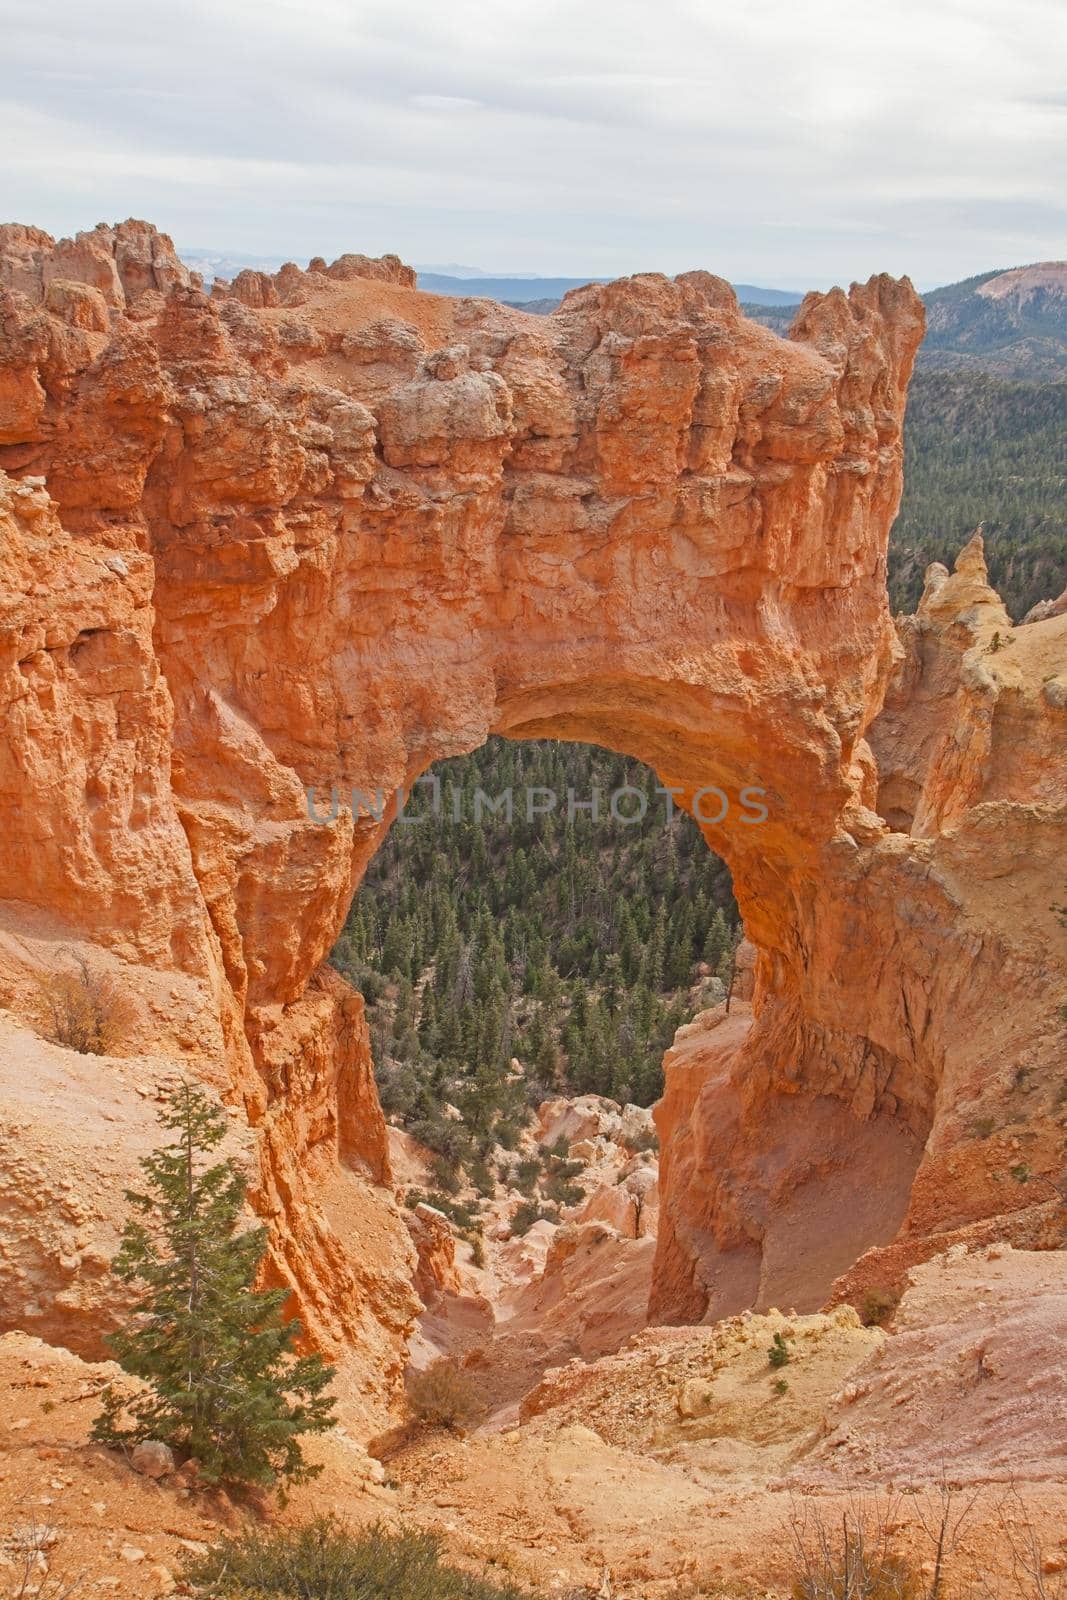 View over Bryce Canyon from The Natural Bridge